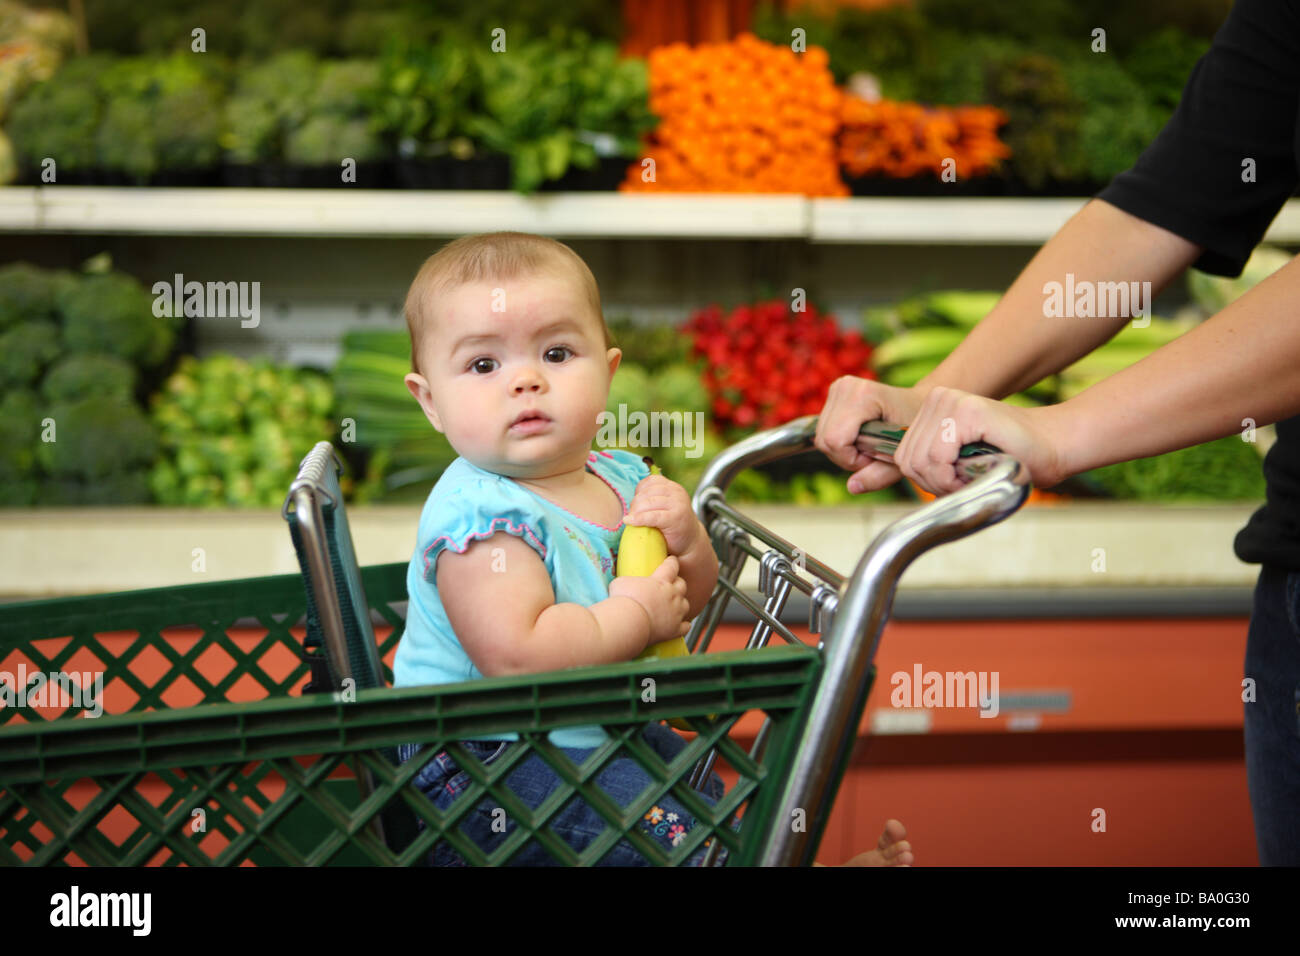 baby grocery cart